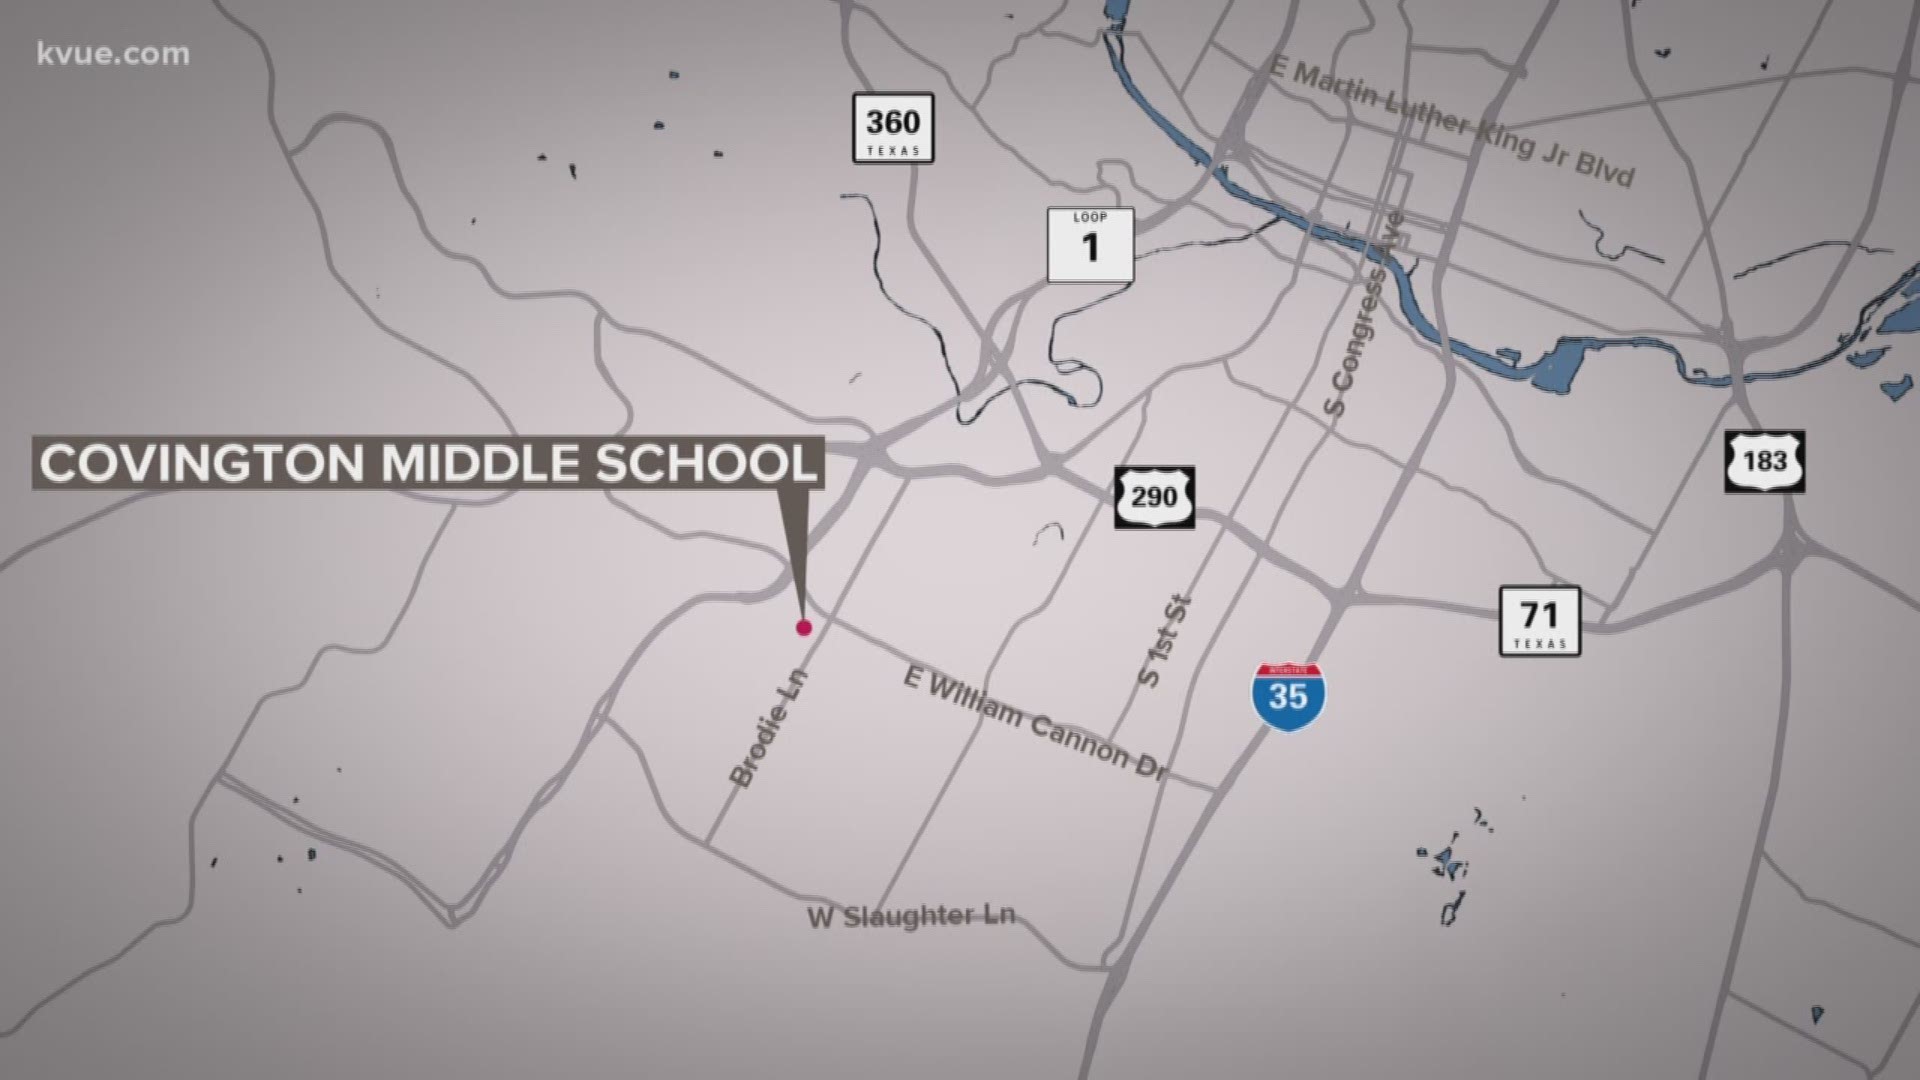 A bomb squad has cleared a suspicious package found at Covington Middle School in South Austin.